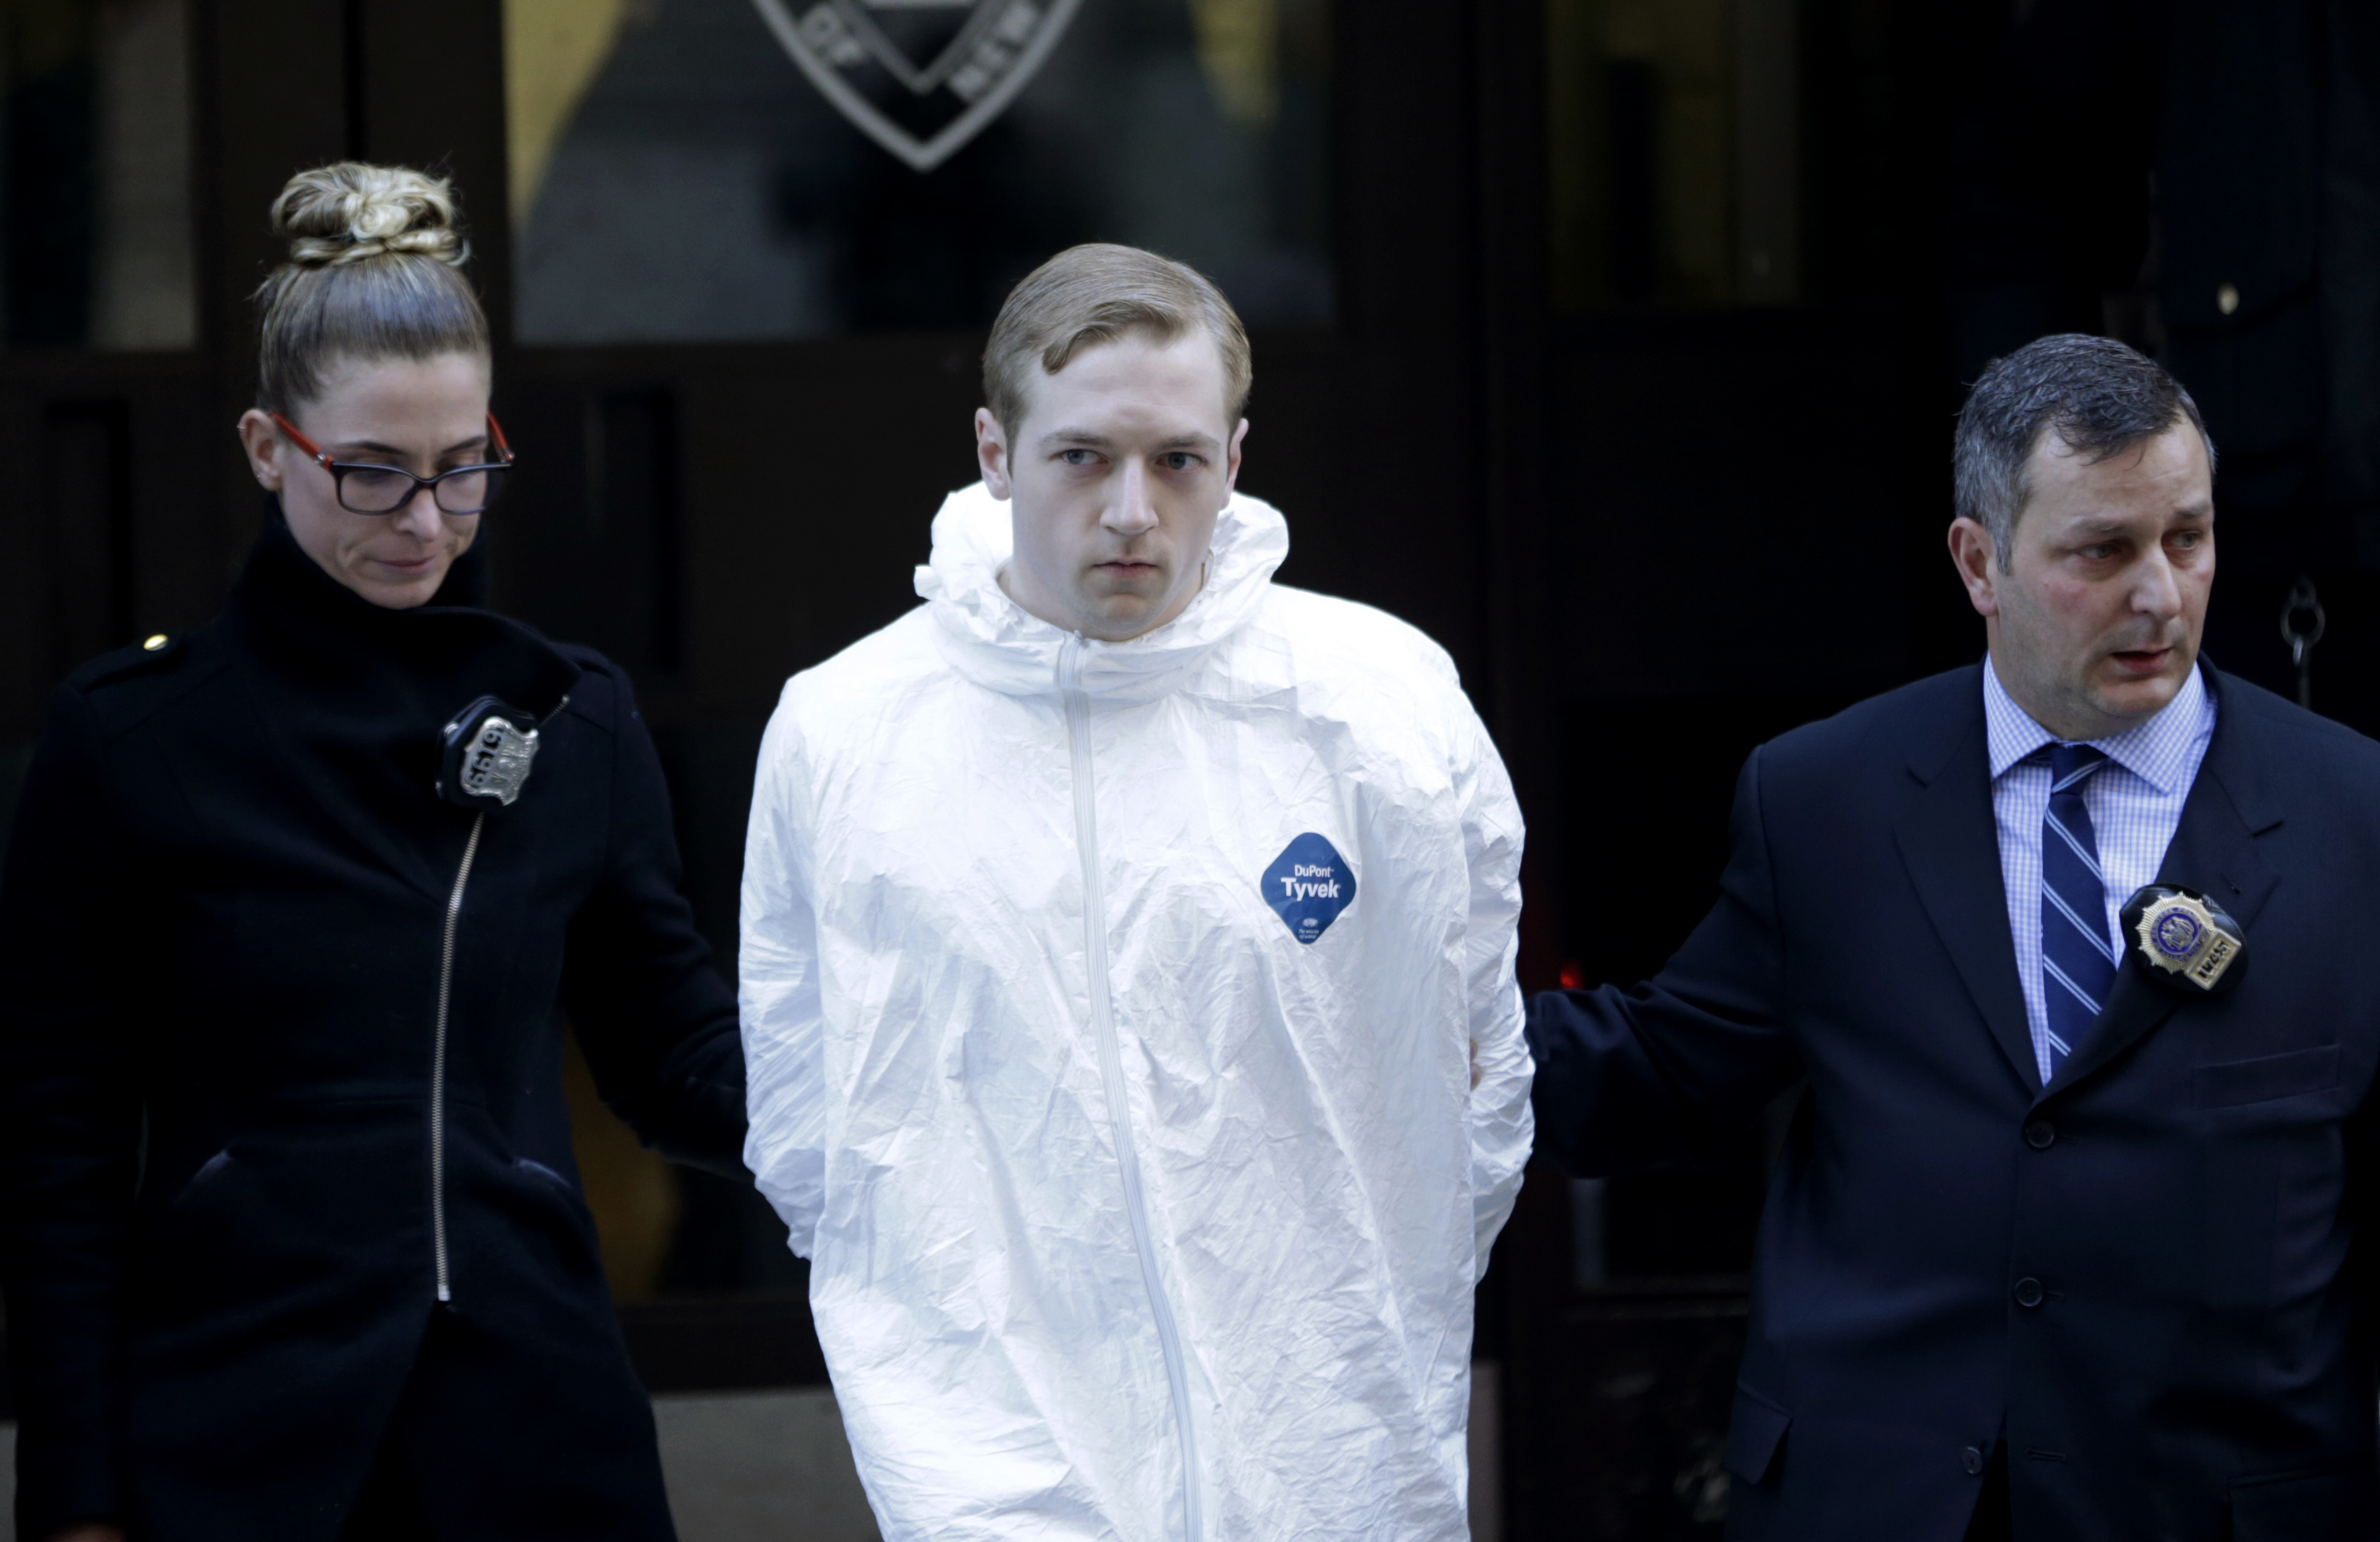 James Harris Jackson is escorted out of a police precinct in New York on March 22, 2017. Police said Jackson, accused of fatally stabbing a black man in New York City, told investigators he traveled from Baltimore specifically to attack black people. (Seth Wenig&mdash;AP)